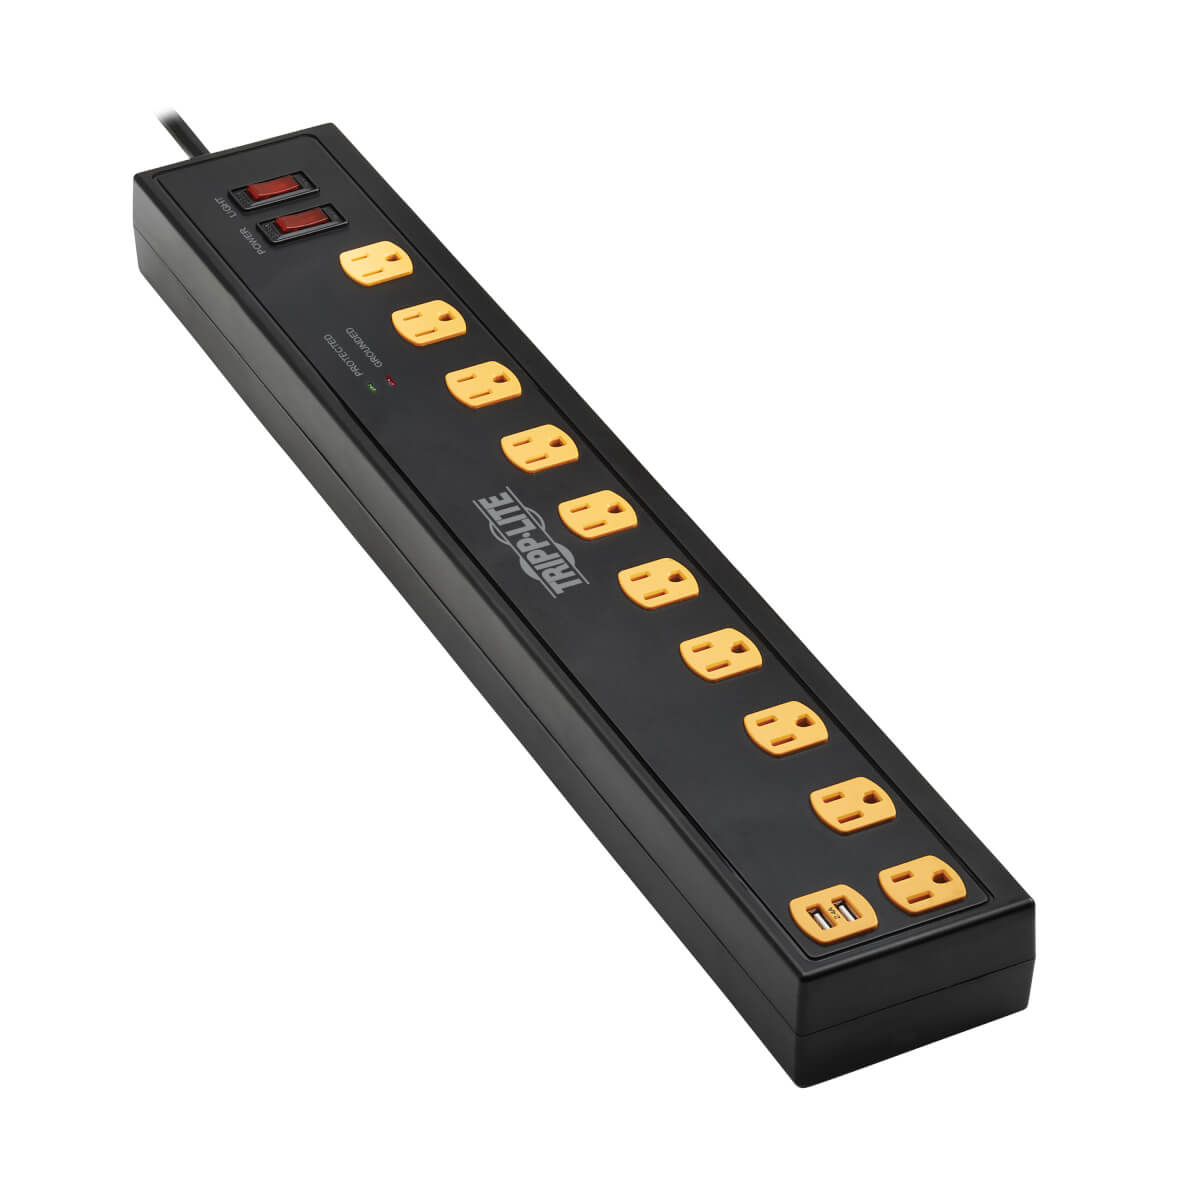 【TLP1006USB】PROTECT IT! 10-OUTLET SURGE PROT